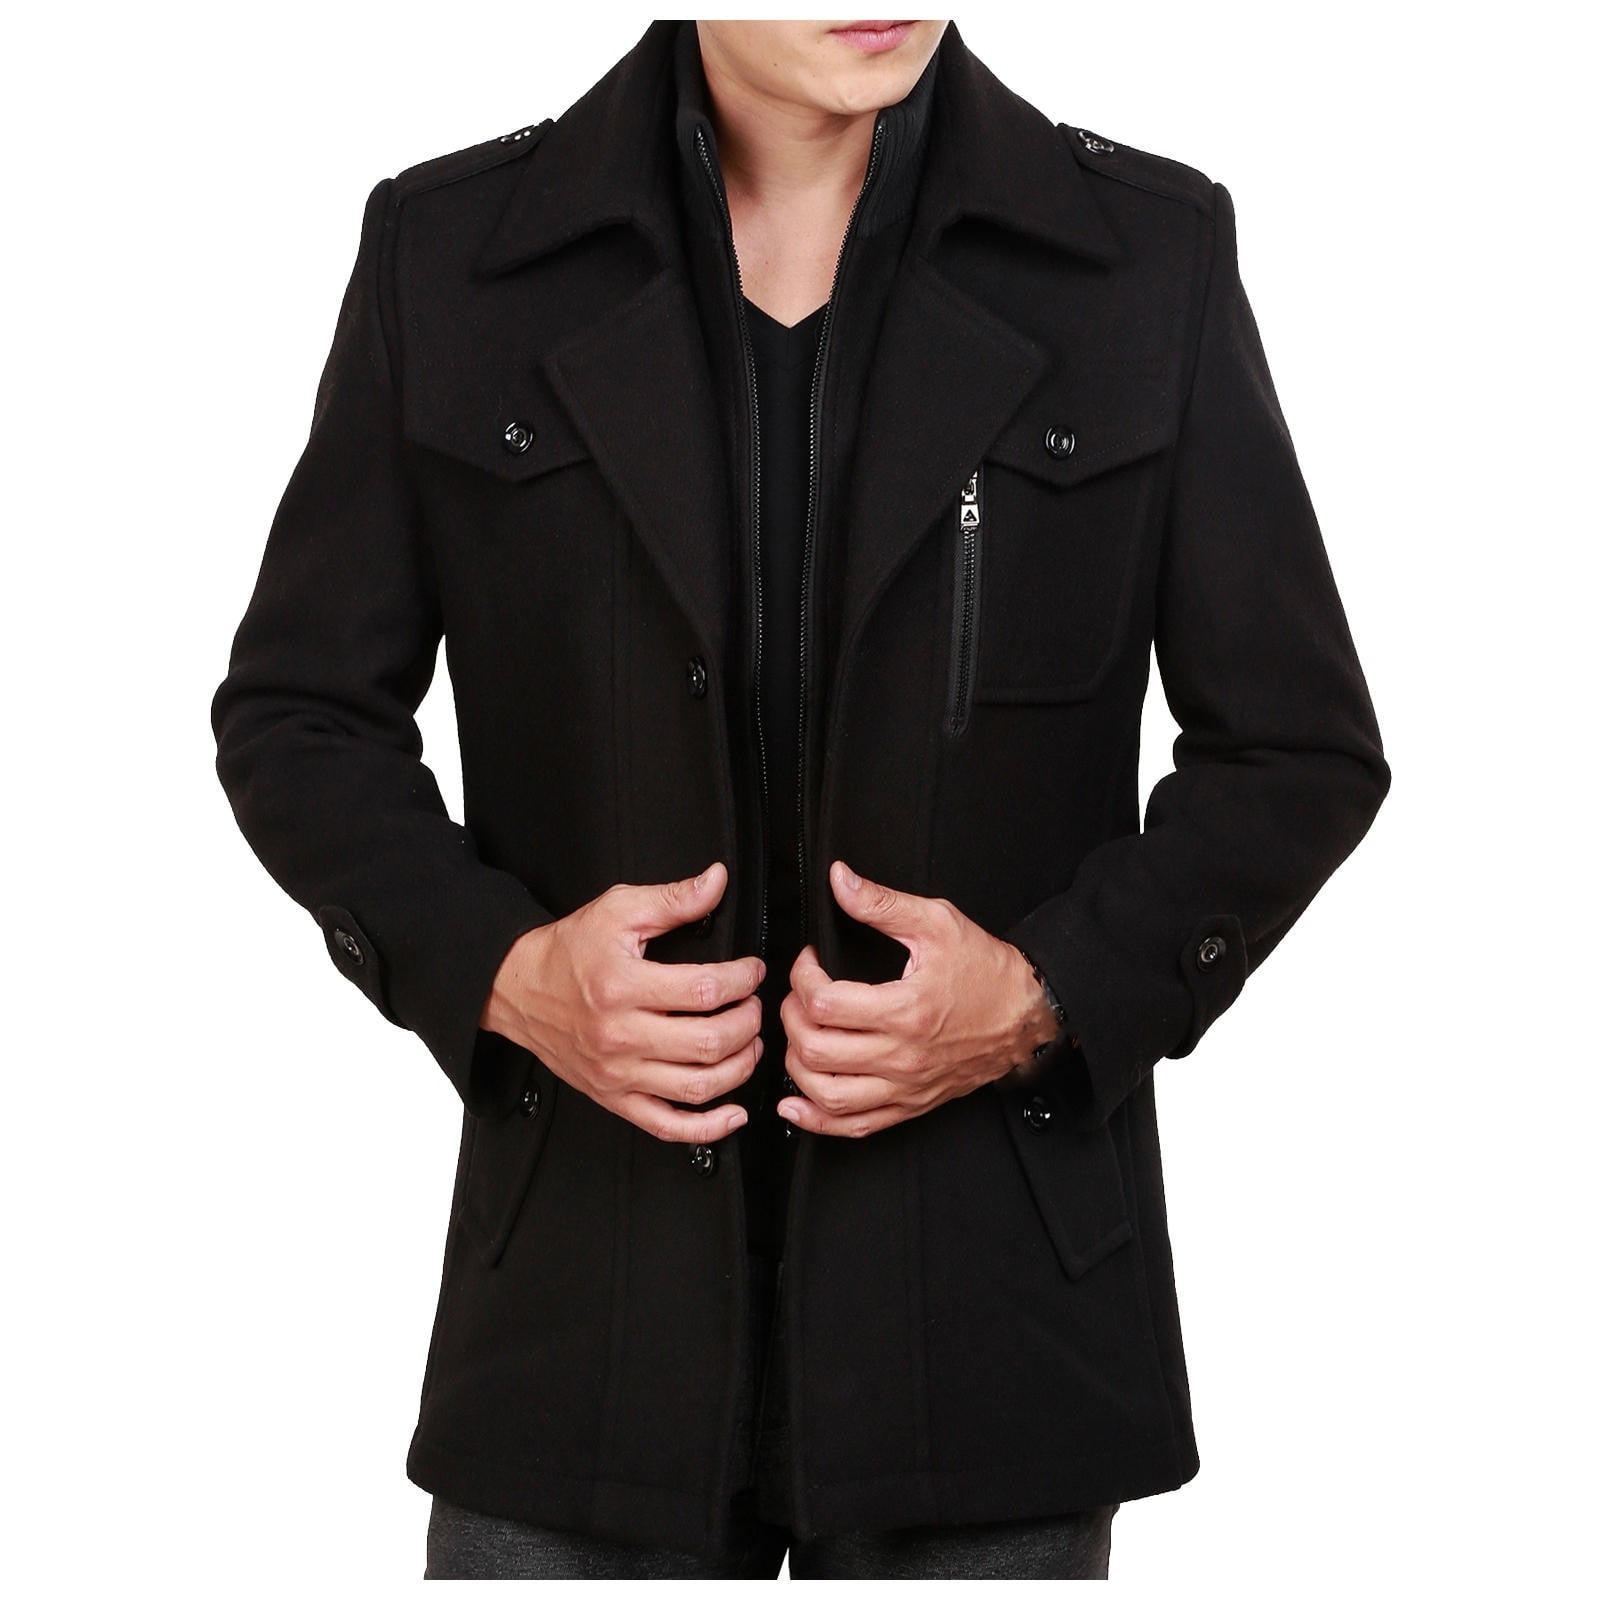 Mens Puffer Jacket Packable with Hood.Mens Casual Wool Trench Coat Fashion Business Long Thicken Slim Overcoat Jacket 